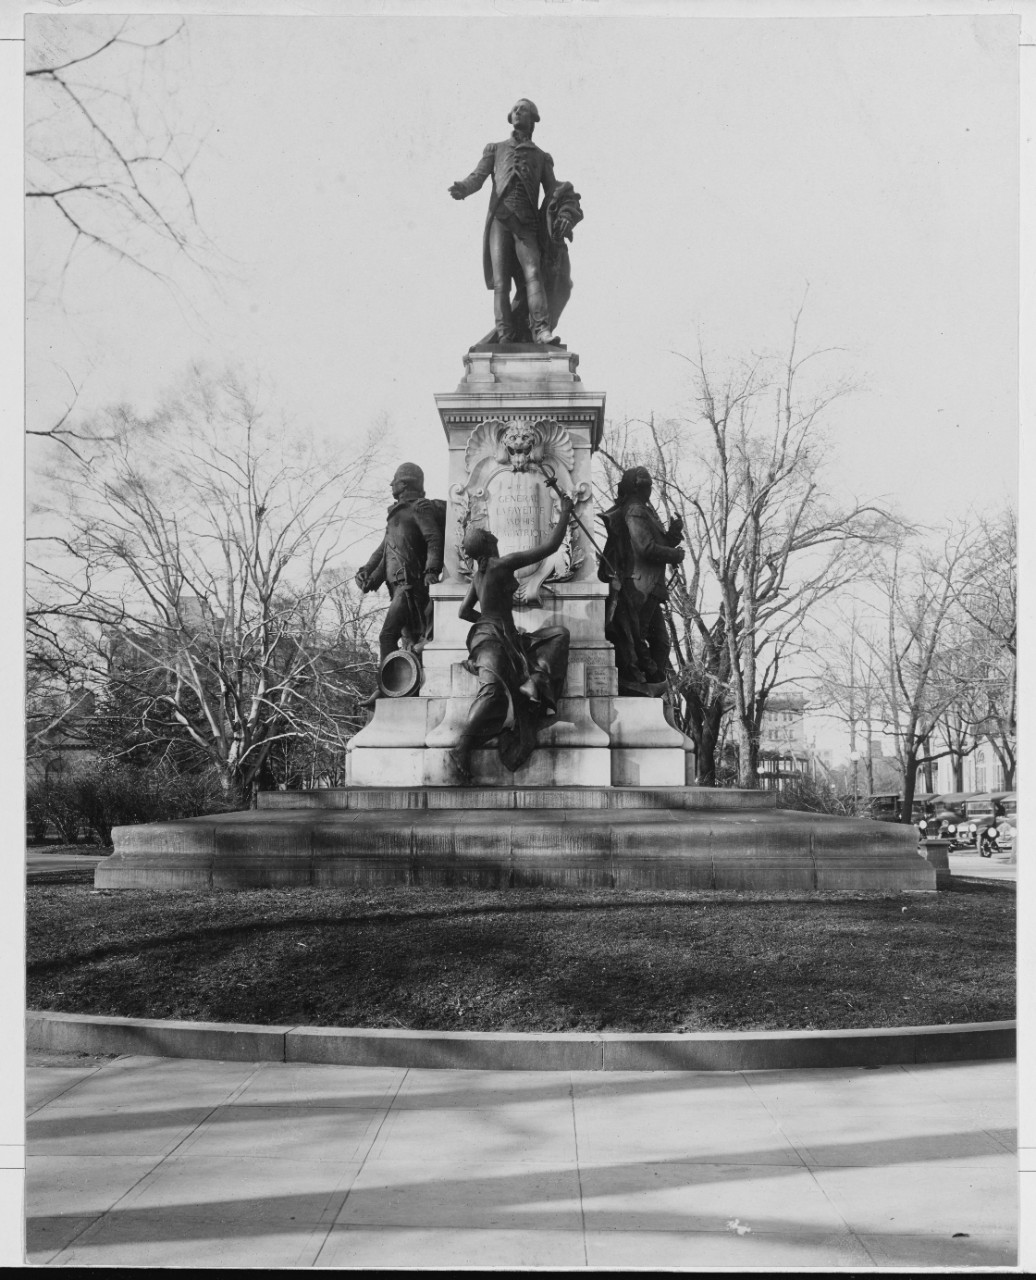 Statute Lafayette and his officers